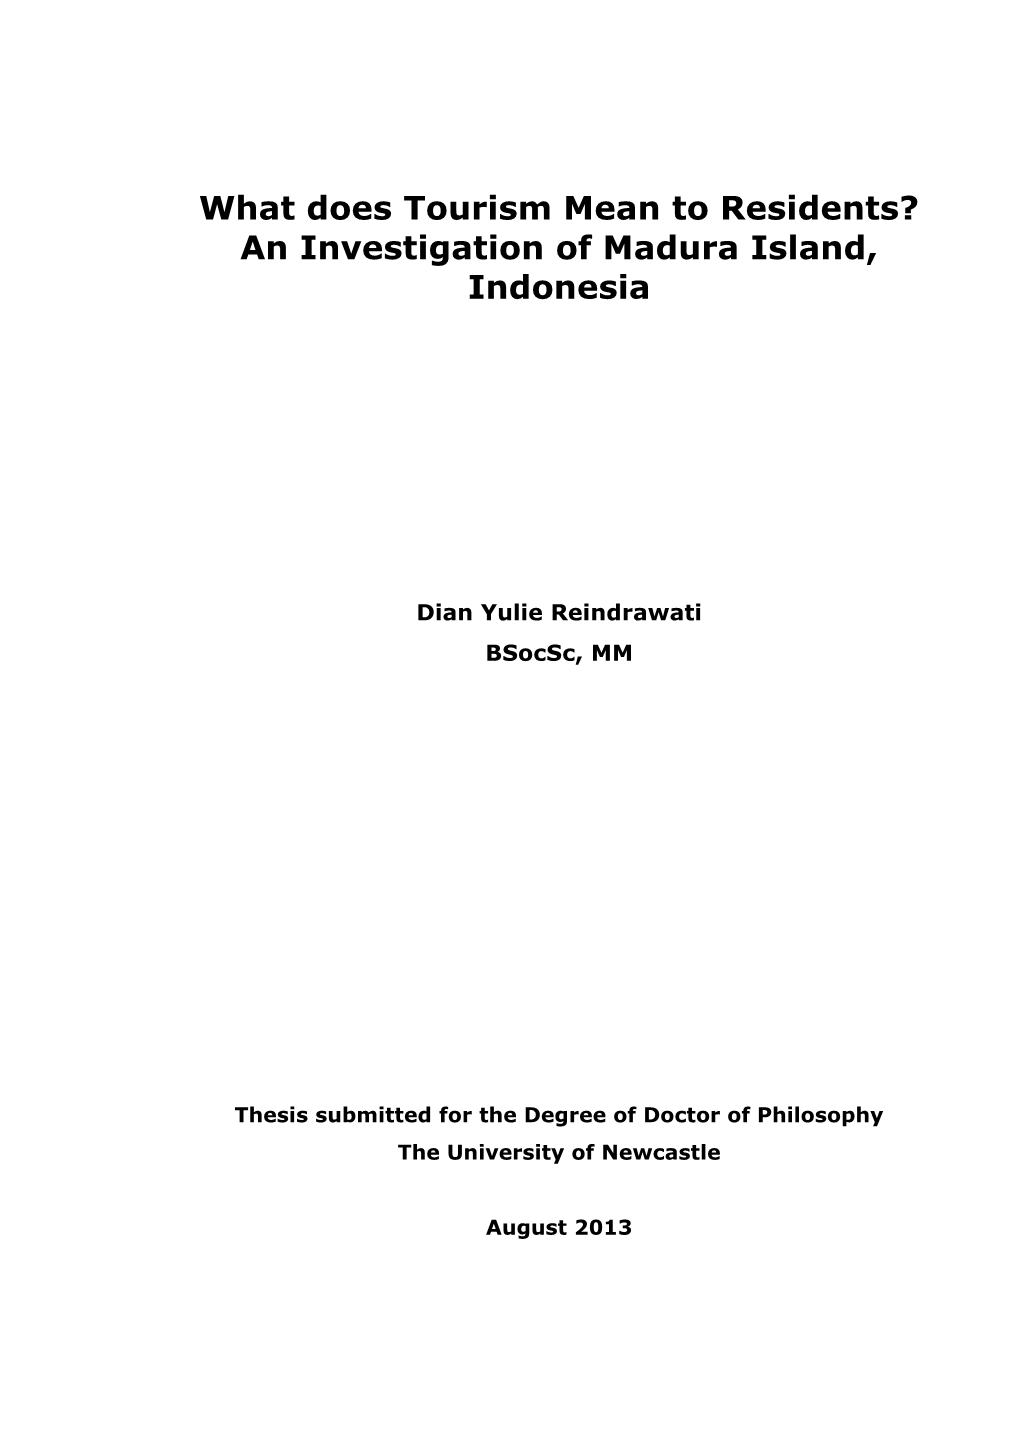 What Does Tourism Mean to Residents? an Investigation of Madura Island, Indonesia